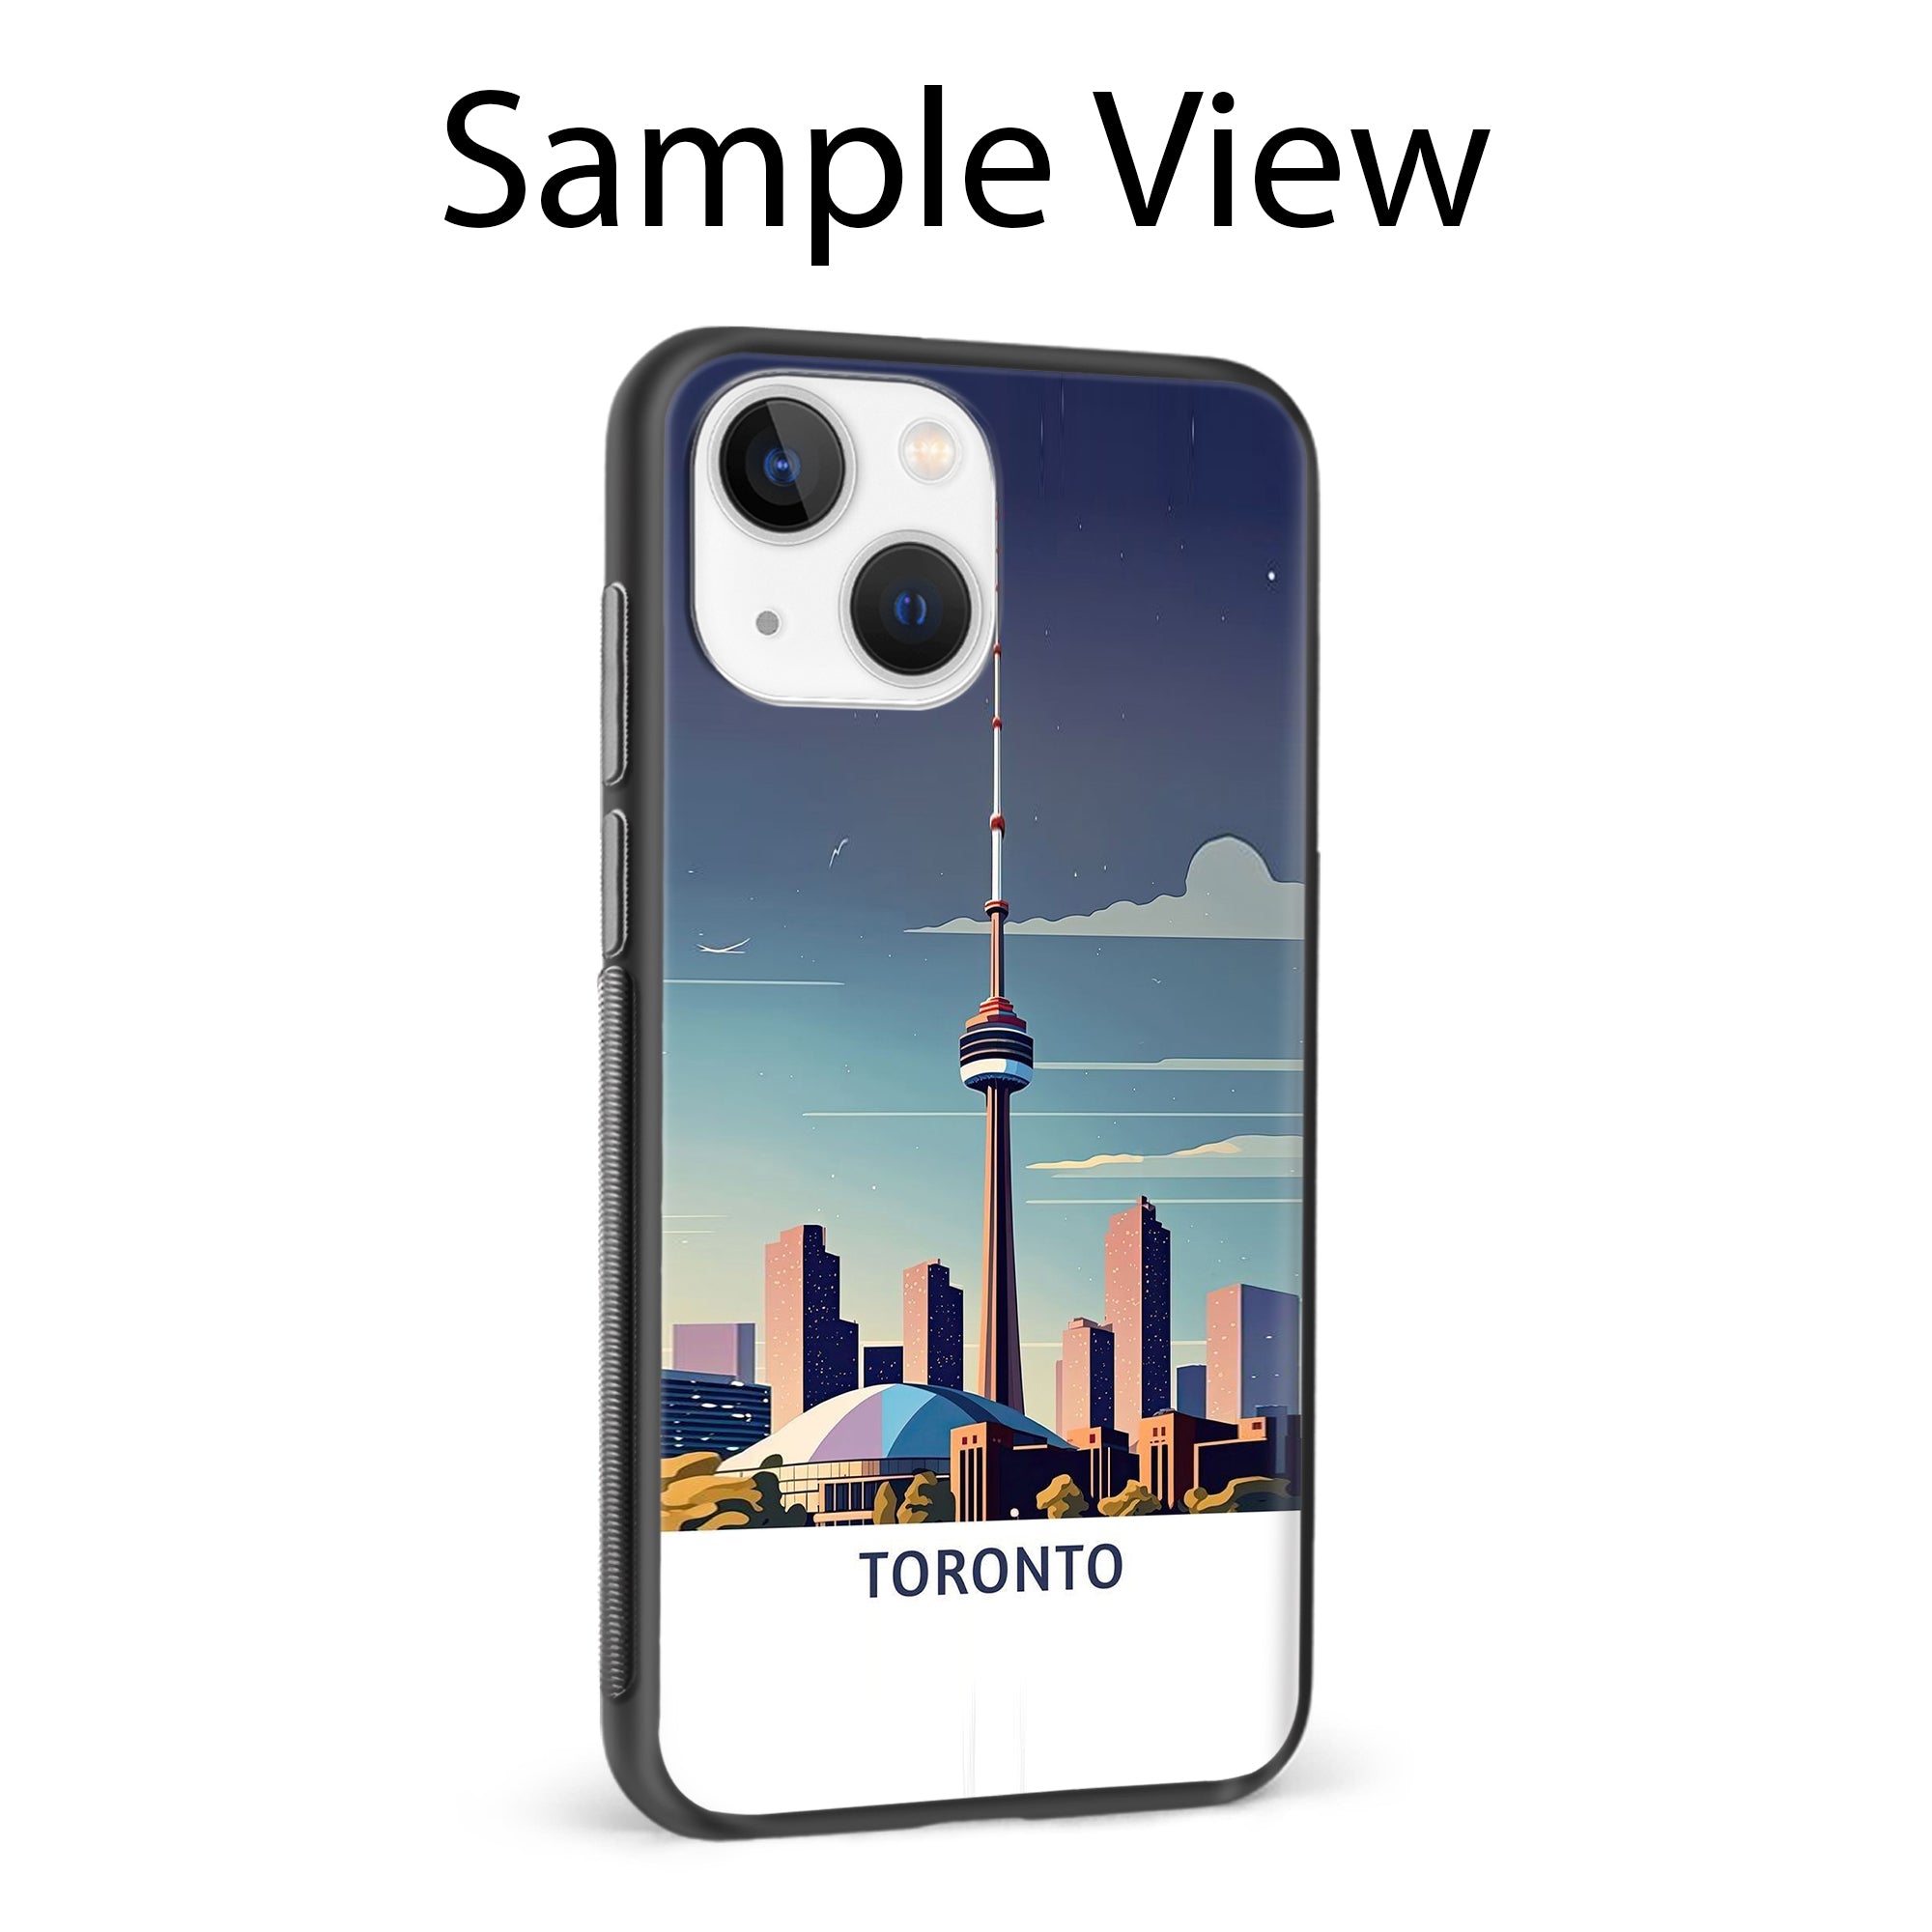 Buy Toronto Glass/Metal Back Mobile Phone Case/Cover For Apple iPhone 12 pro max Online